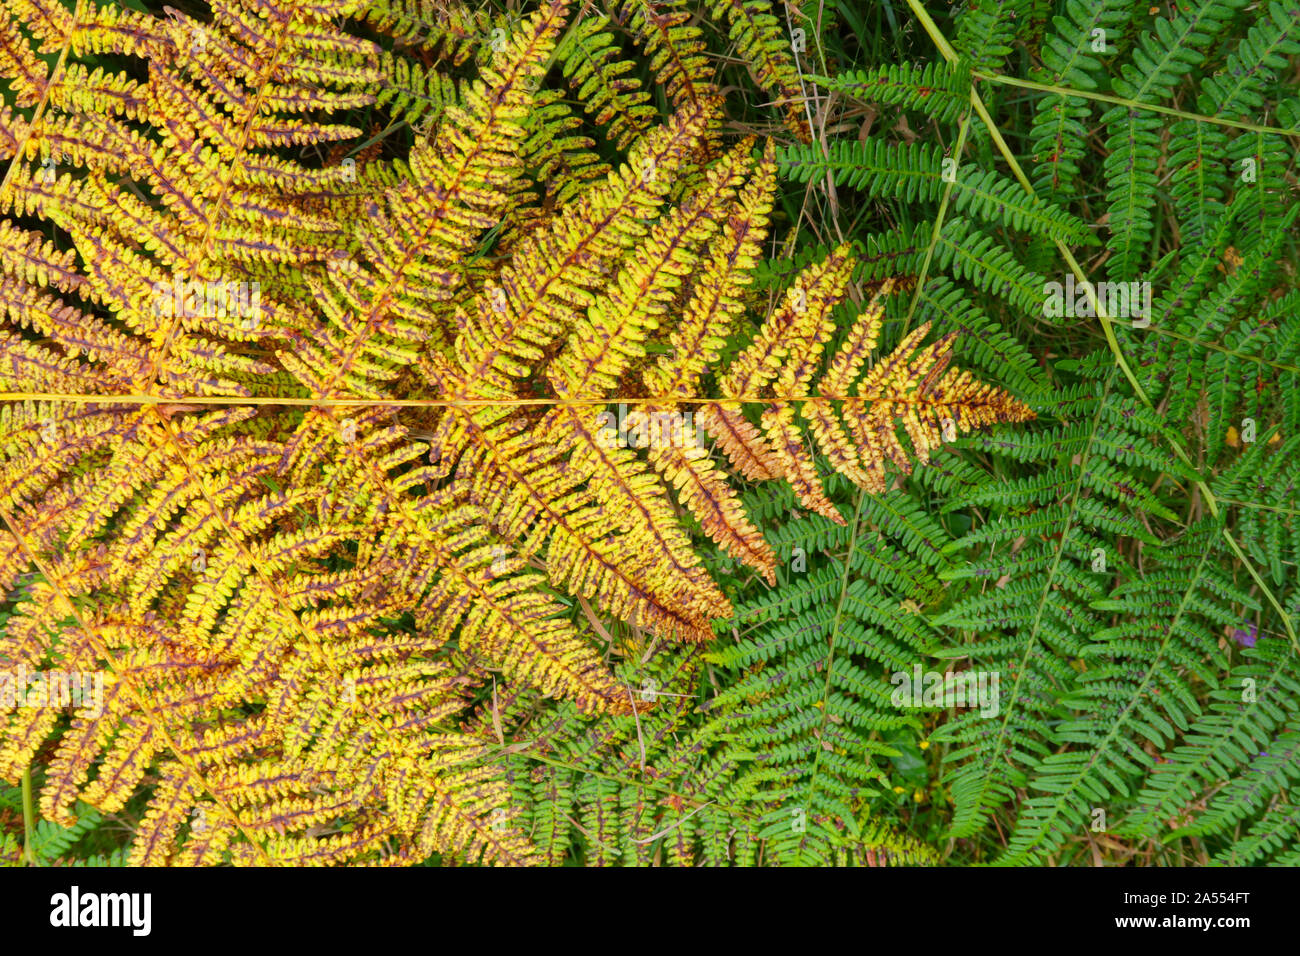 Bracken, Pteridium aquilinum, a native British fern commonly found in woodland and heathland. Showing change of colour from green to yellow (then to b Stock Photo